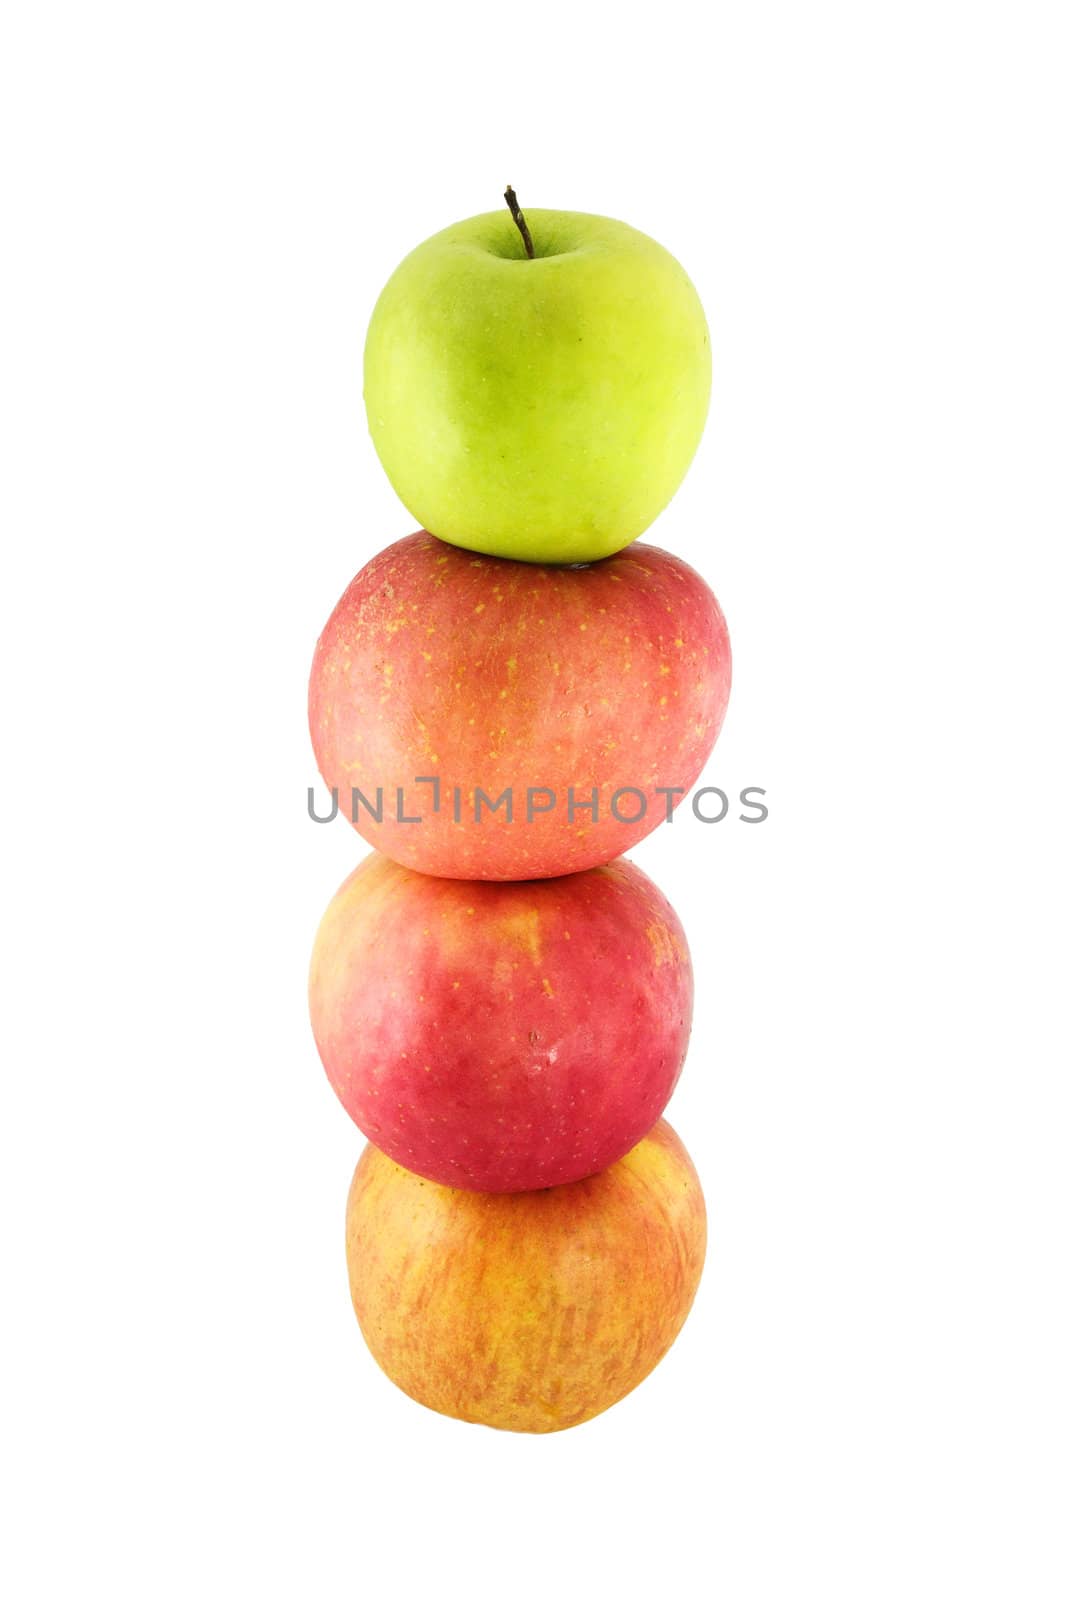 Fresh red apples stacked on top of one another with a green appl by geargodz